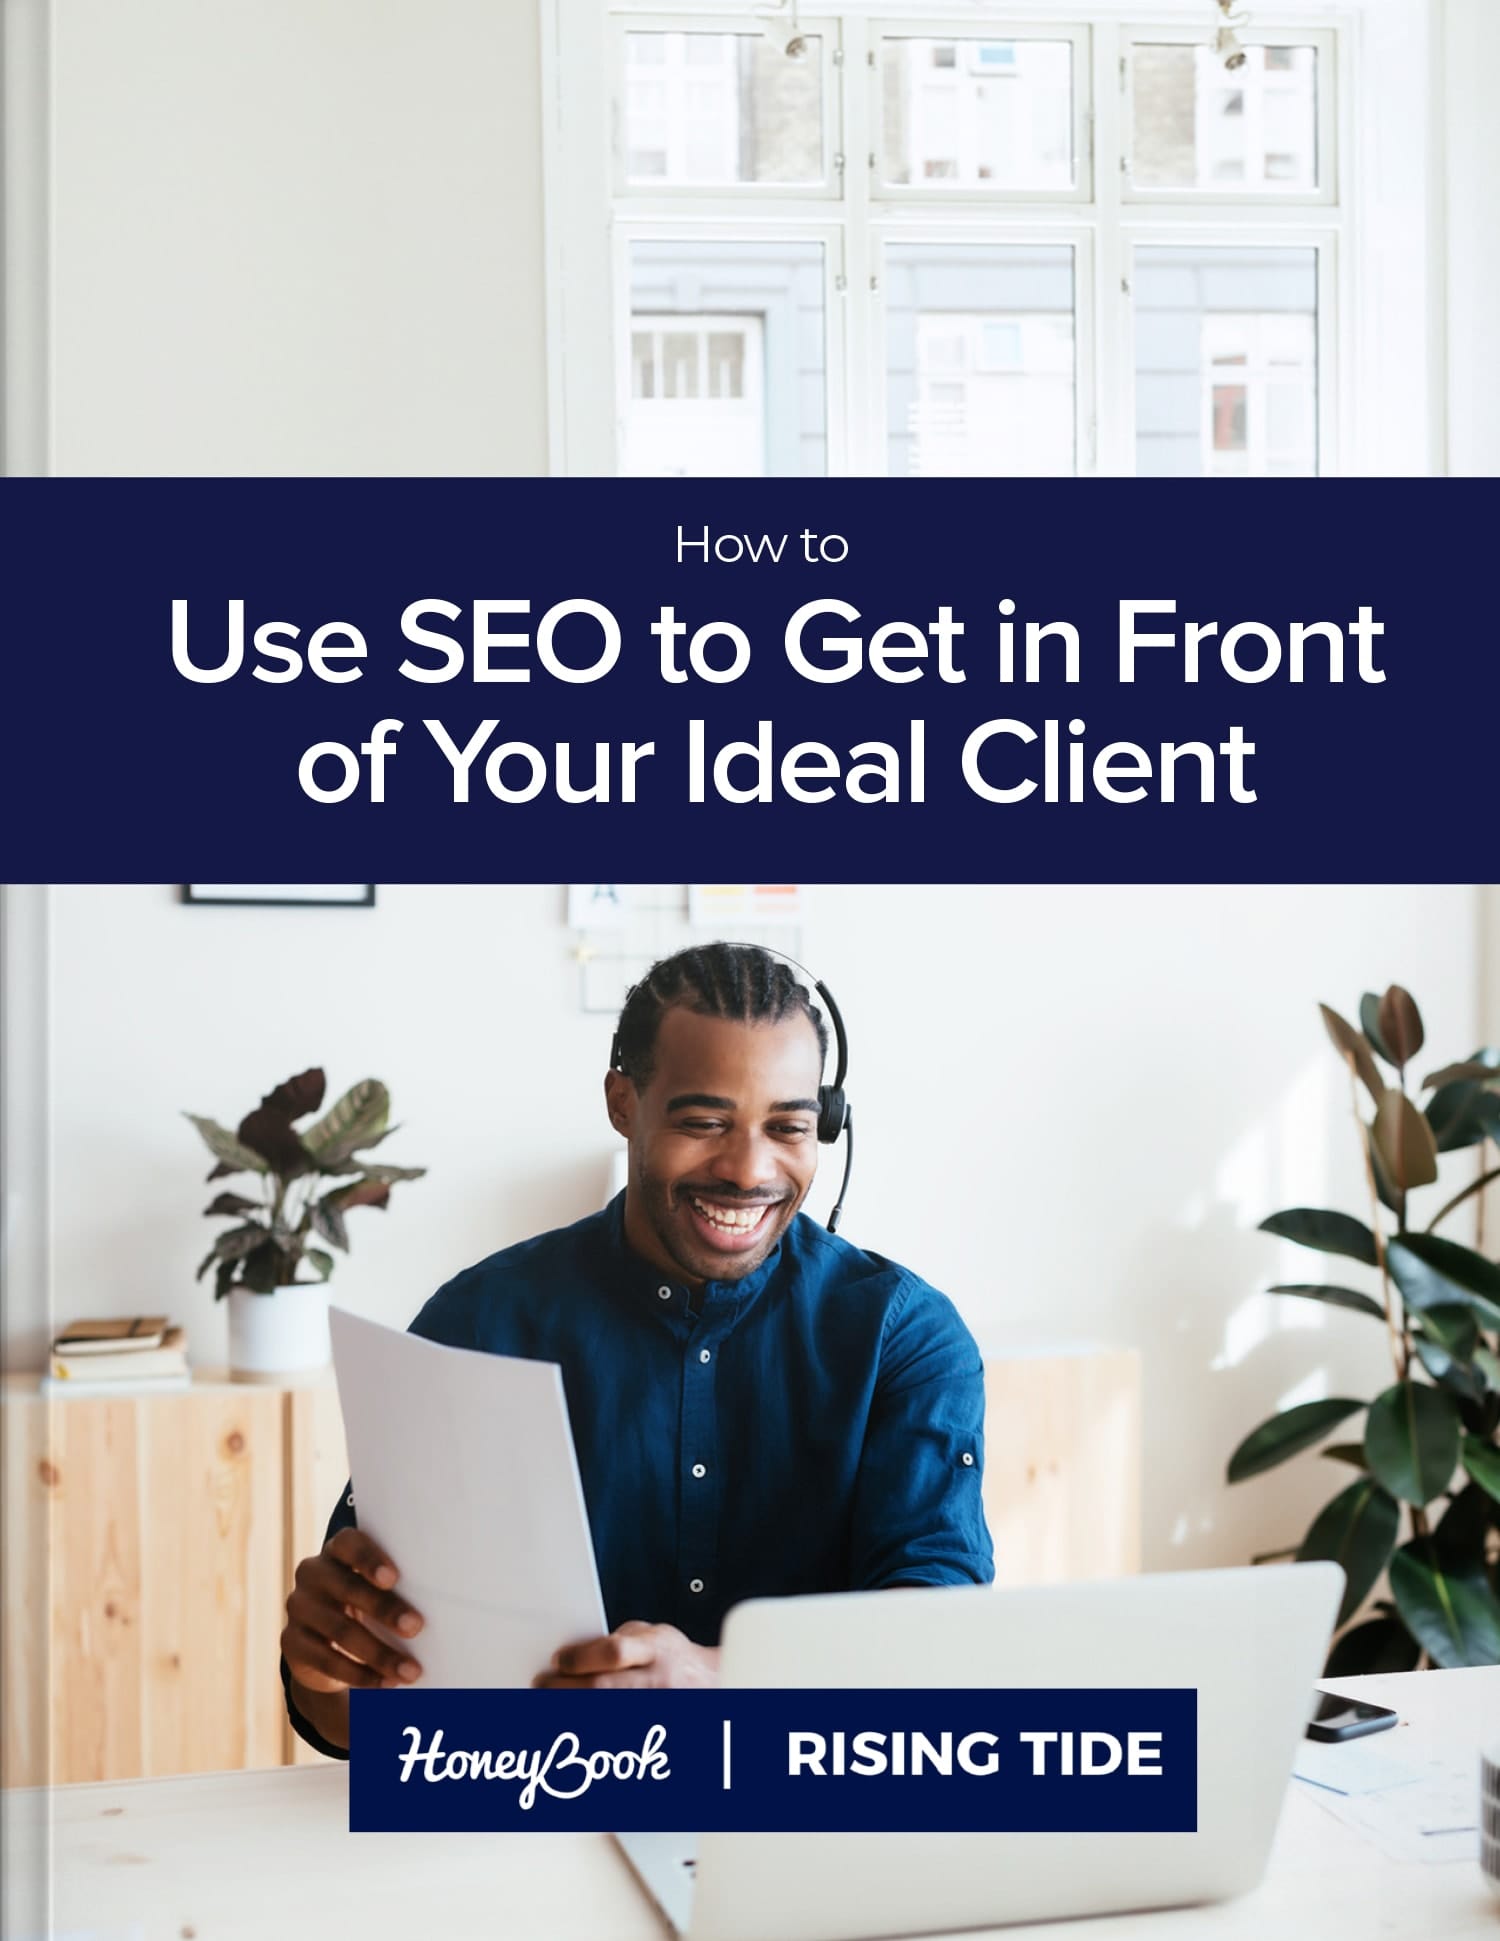 How to Use SEO to Get in Front of Your Ideal Client – The Ultimate Guide